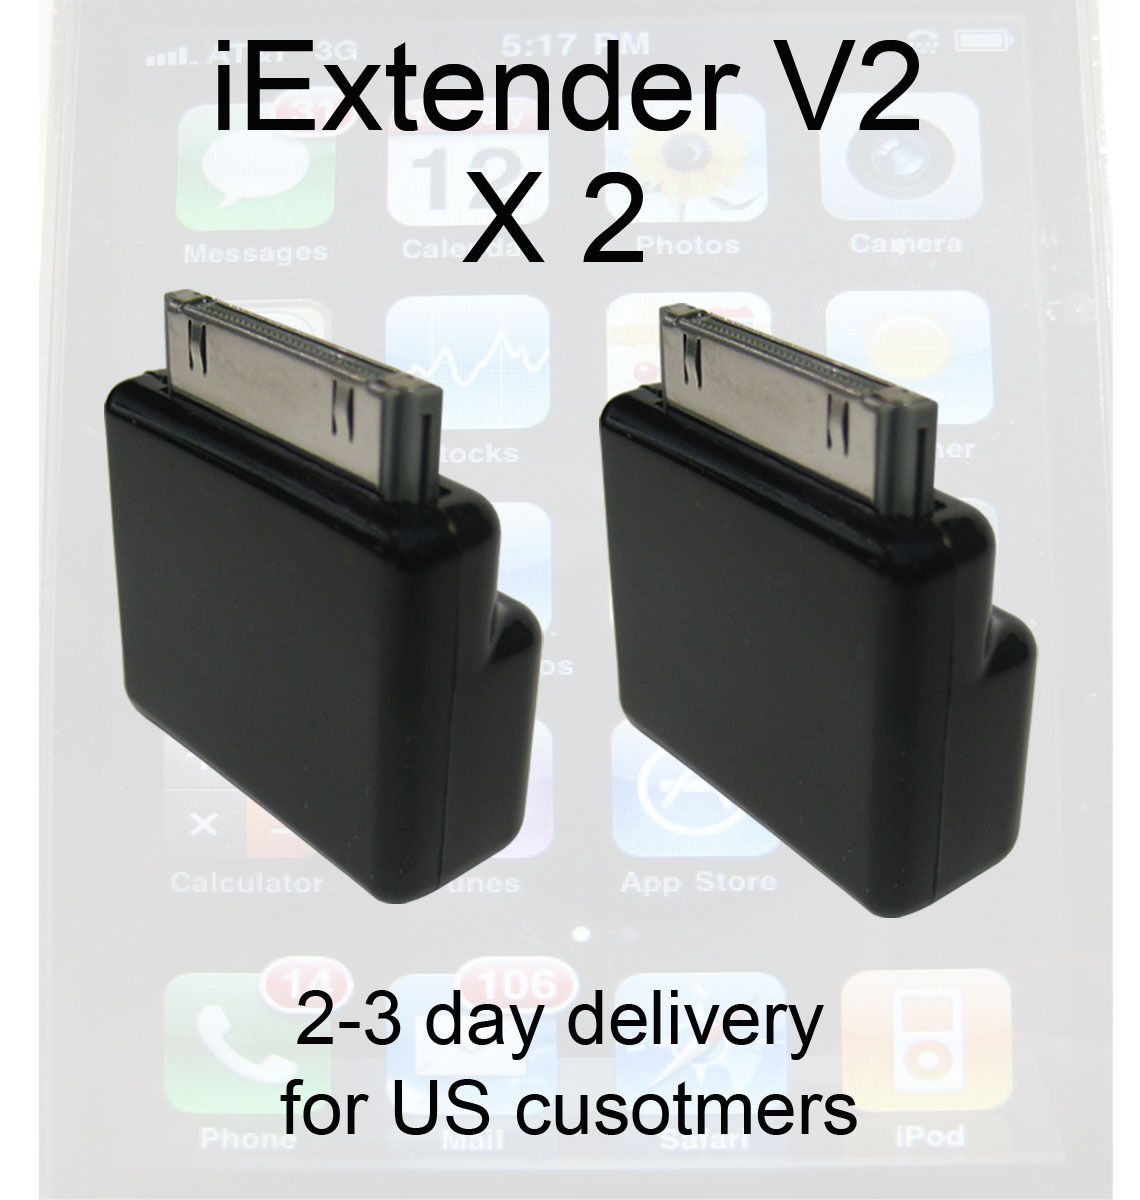  30 Pin Adapter Black Basic X2 Deal for iPods iPhones iPads Etc